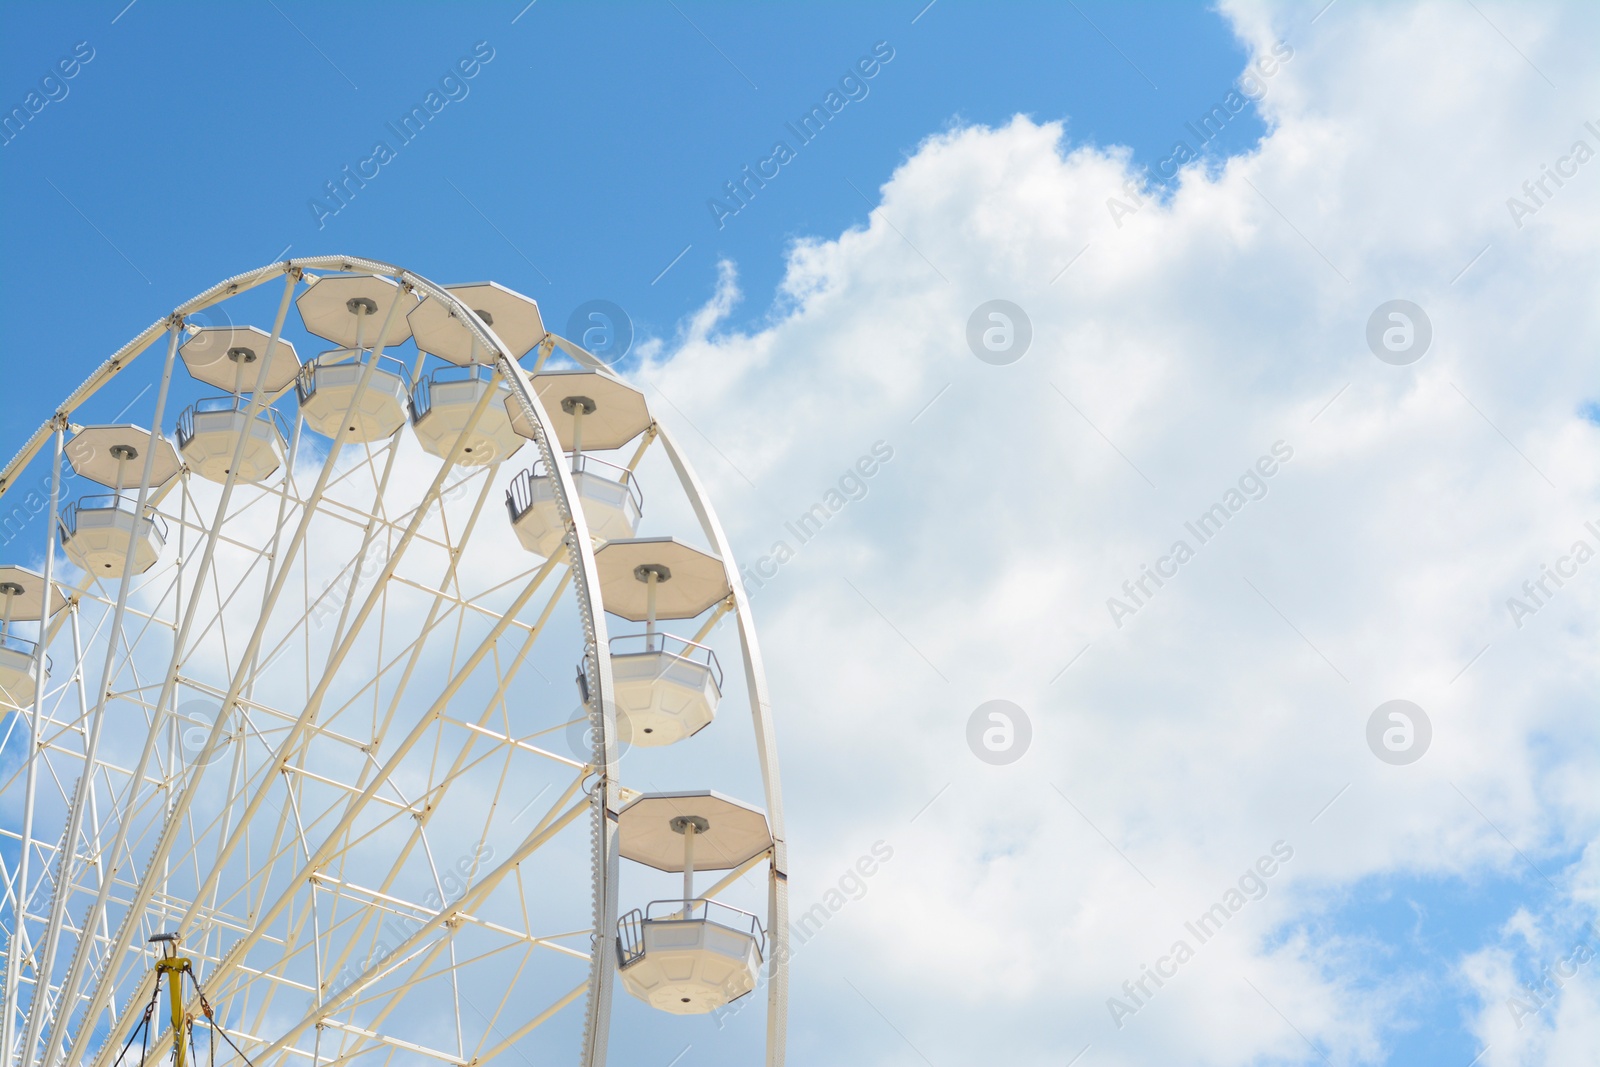 Photo of Large observation wheel against blue cloudy sky, space for text